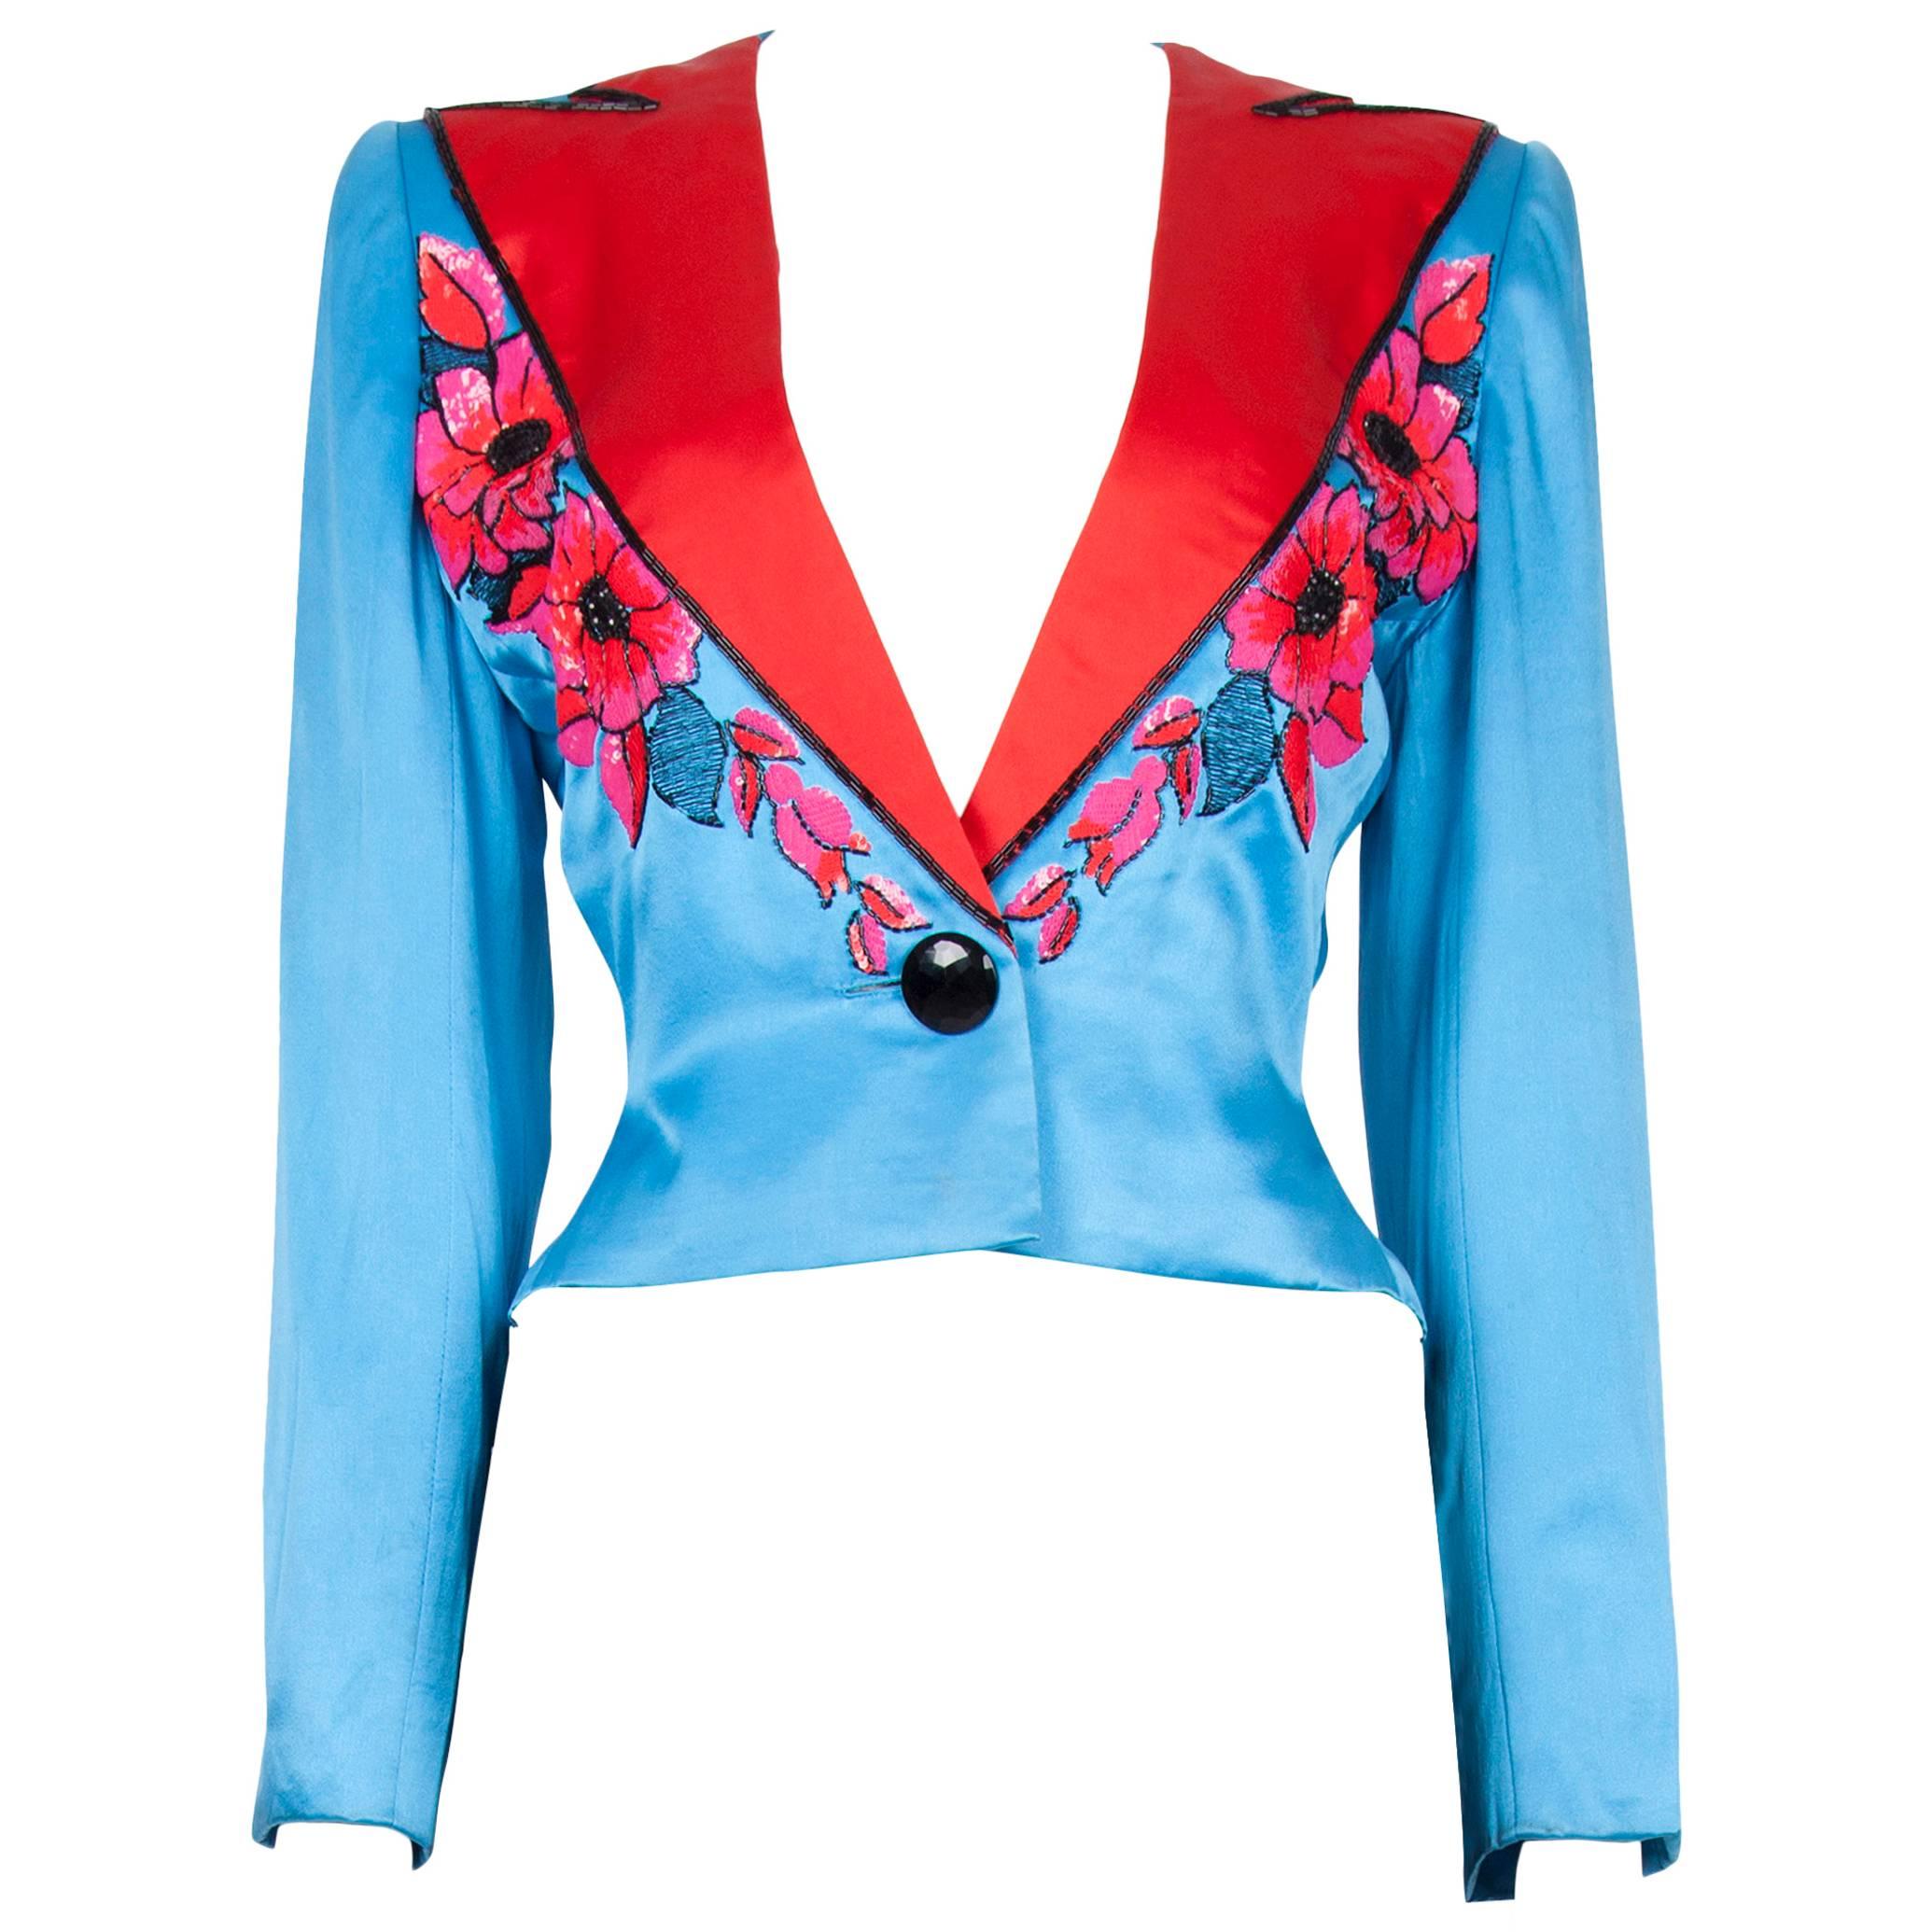 S/S 1983 Dior Couture Turquoise Satin Jacket Pink & Red Sequinned Embroidery For Sale